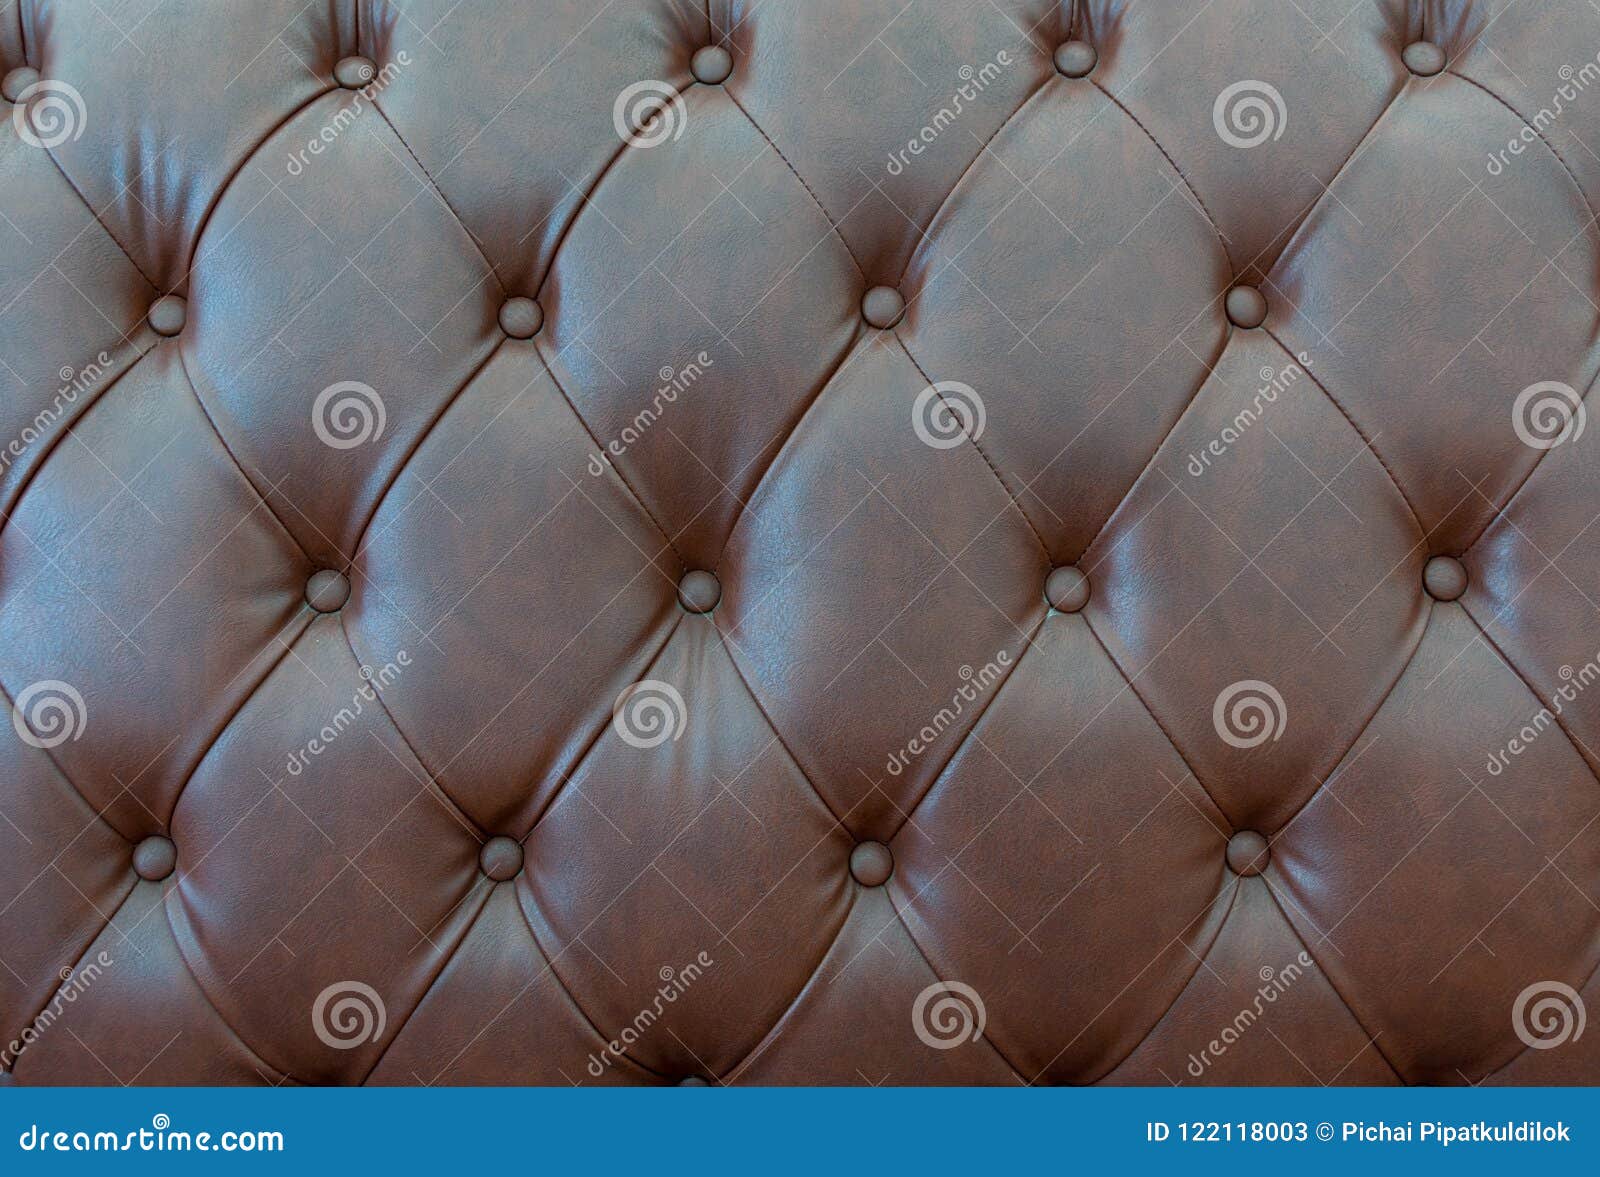 close up leathers texture of sofa